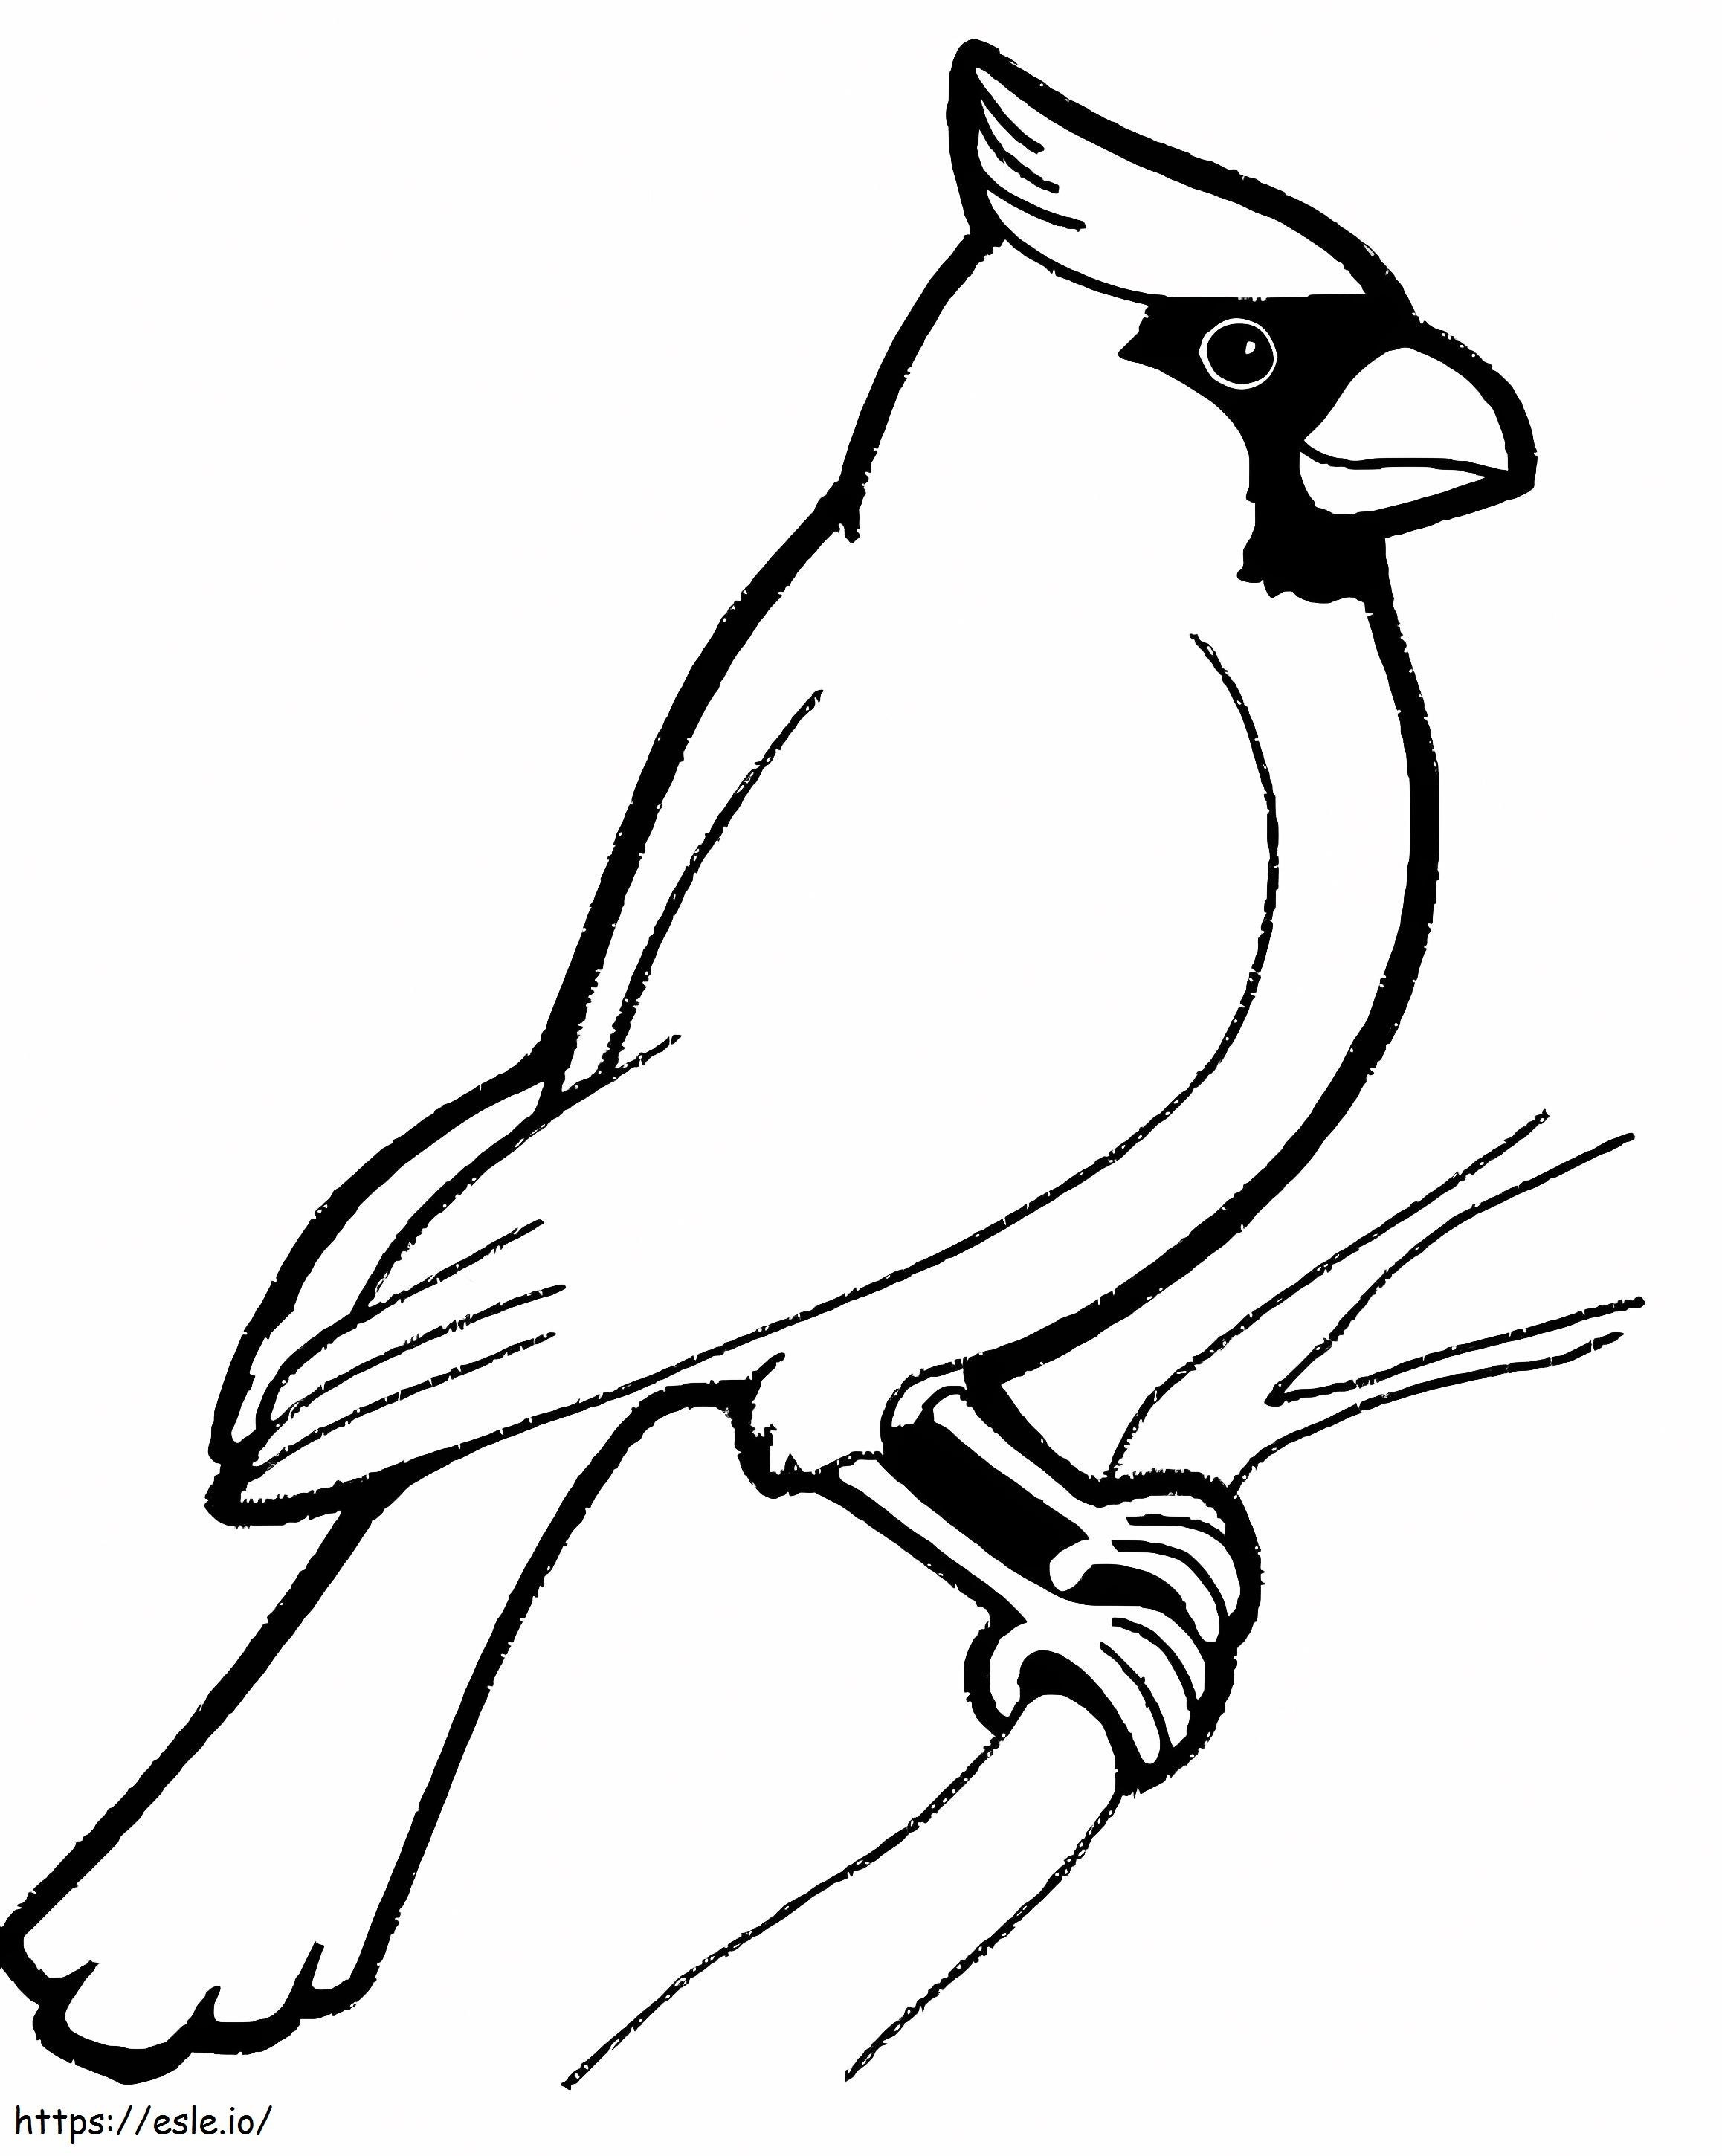 Cardinal On A Branch coloring page